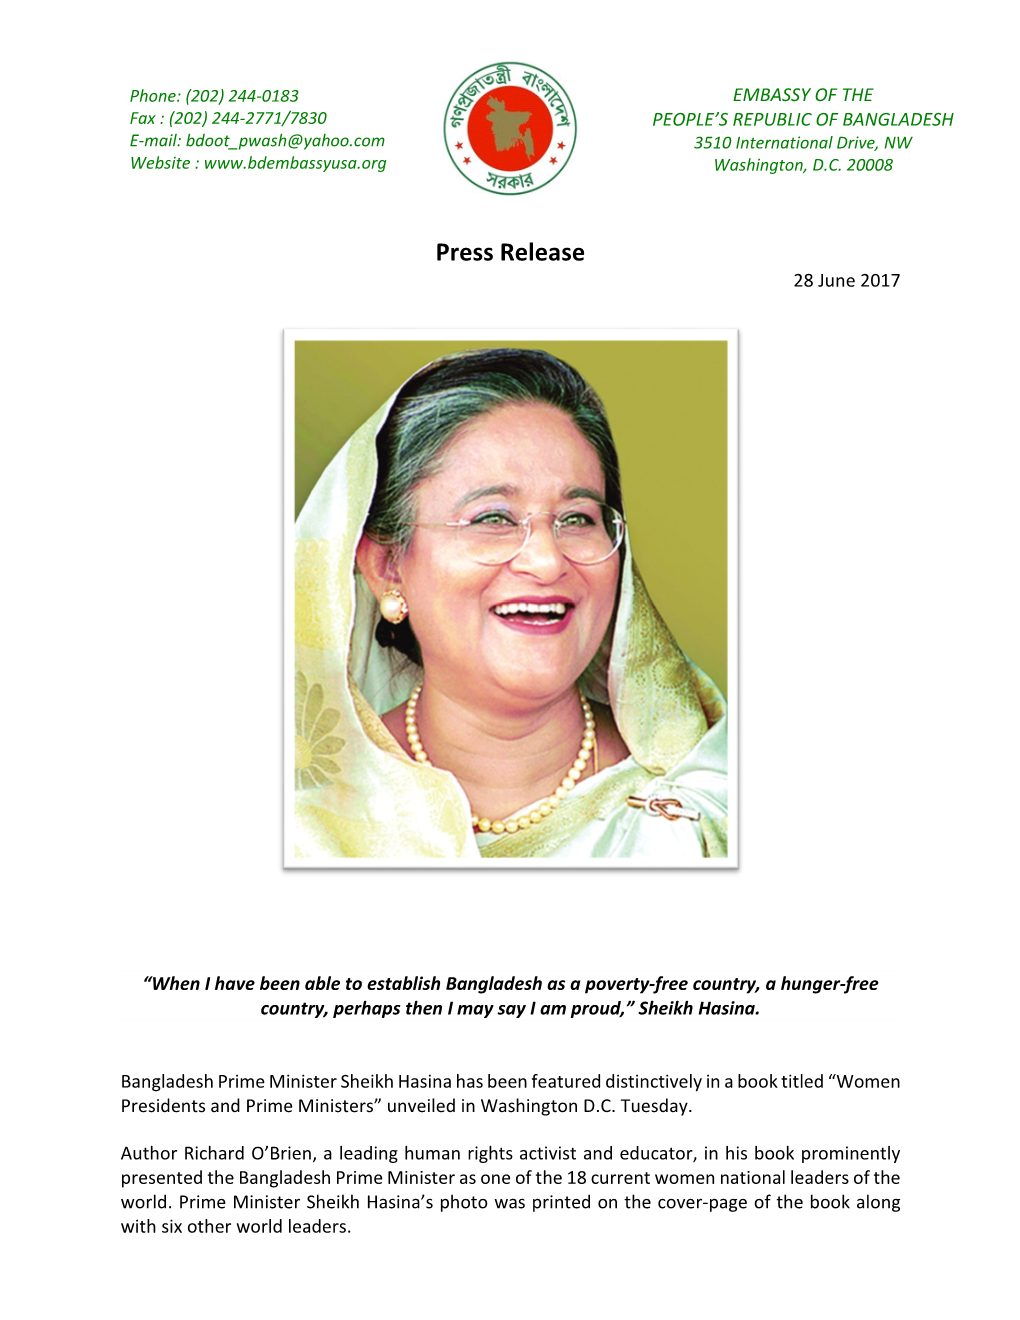 Bangladesh Prime Minister Sheikh Hasina Has Been Featured Distinctively in a Book Titled “Women Presidents and Prime Ministers” Unveiled in Washington D.C